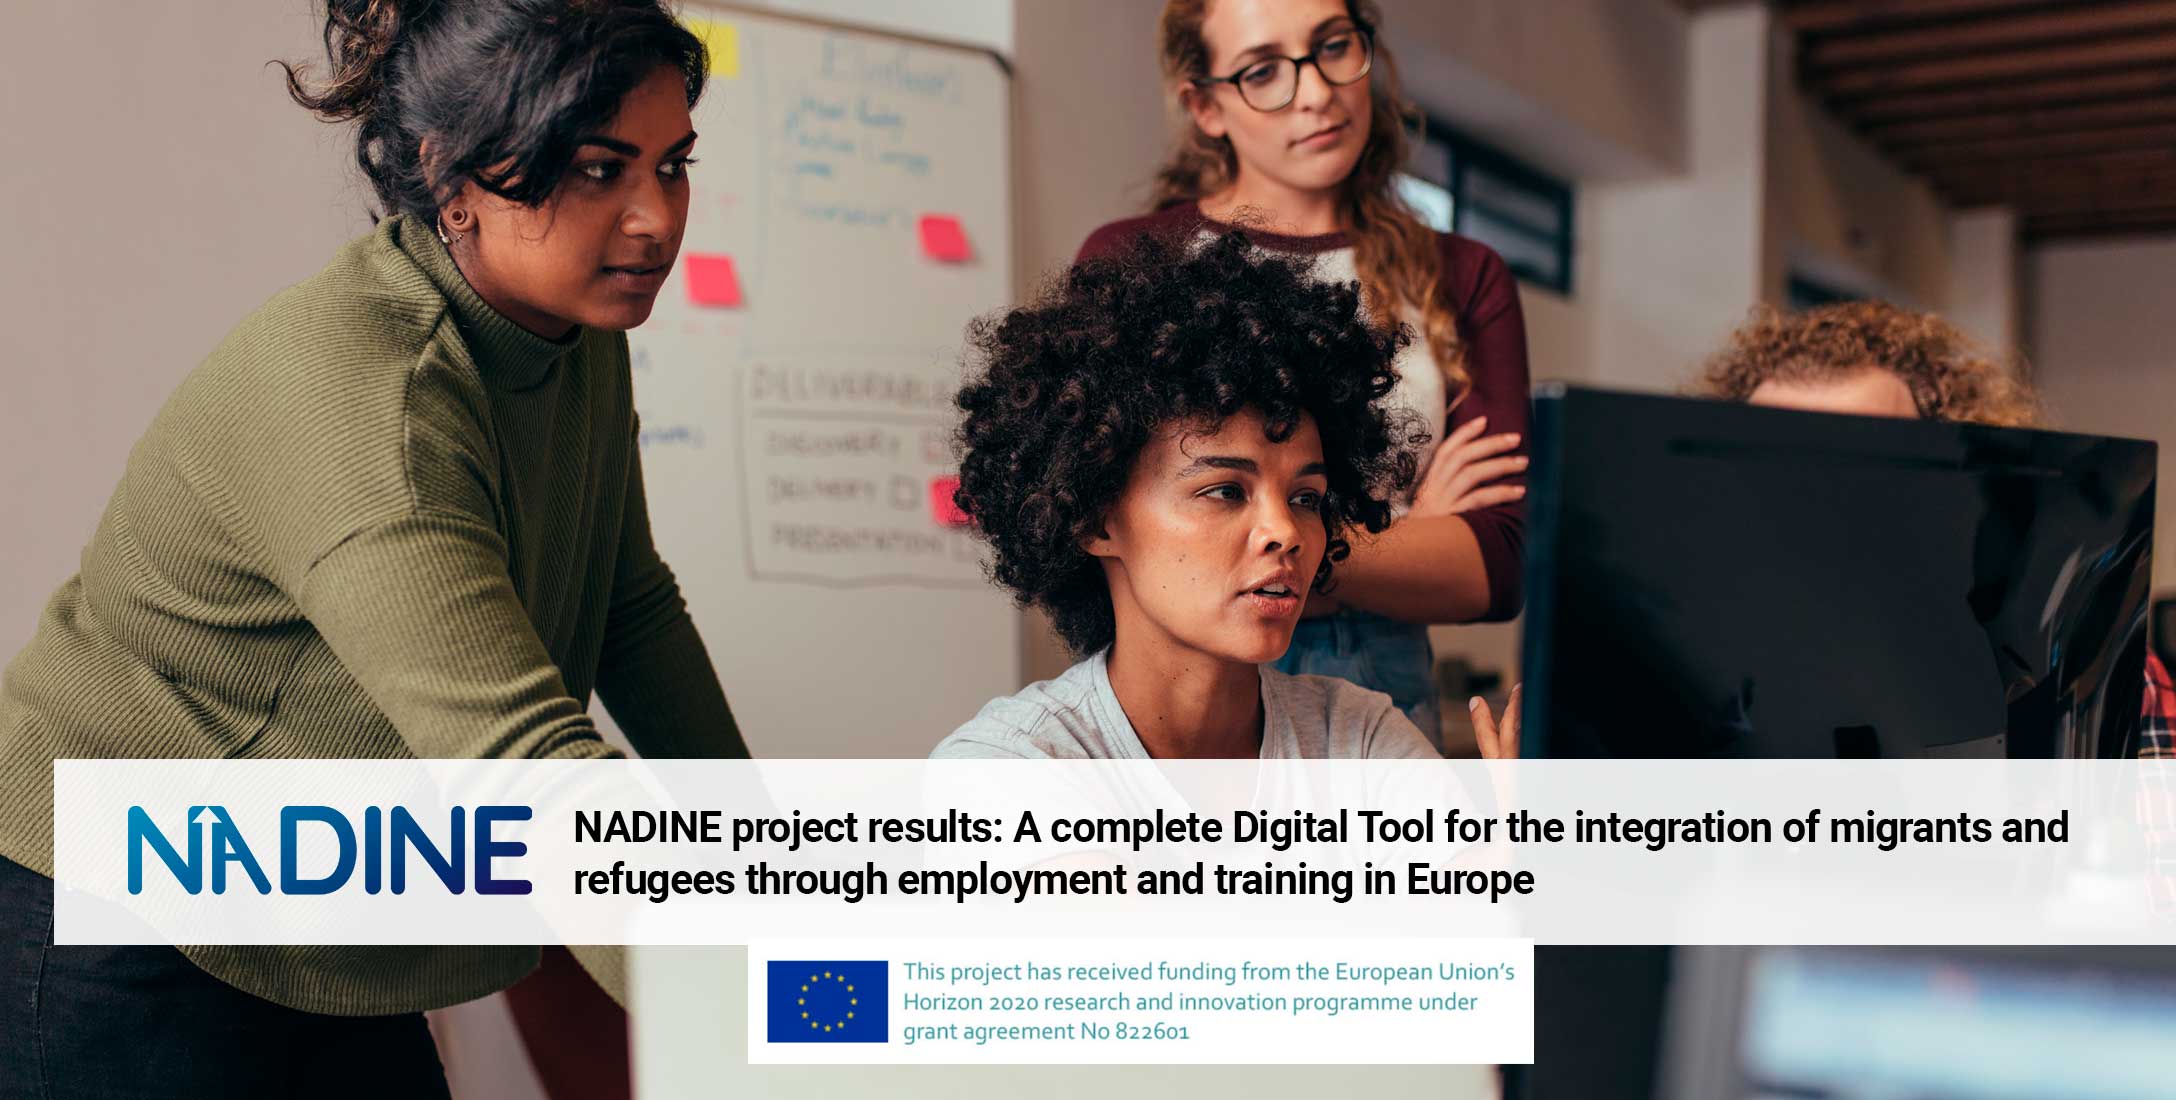 NADINE project results: A Digital Tool for the integration of migrants and refugees to enhance their employment in Europe